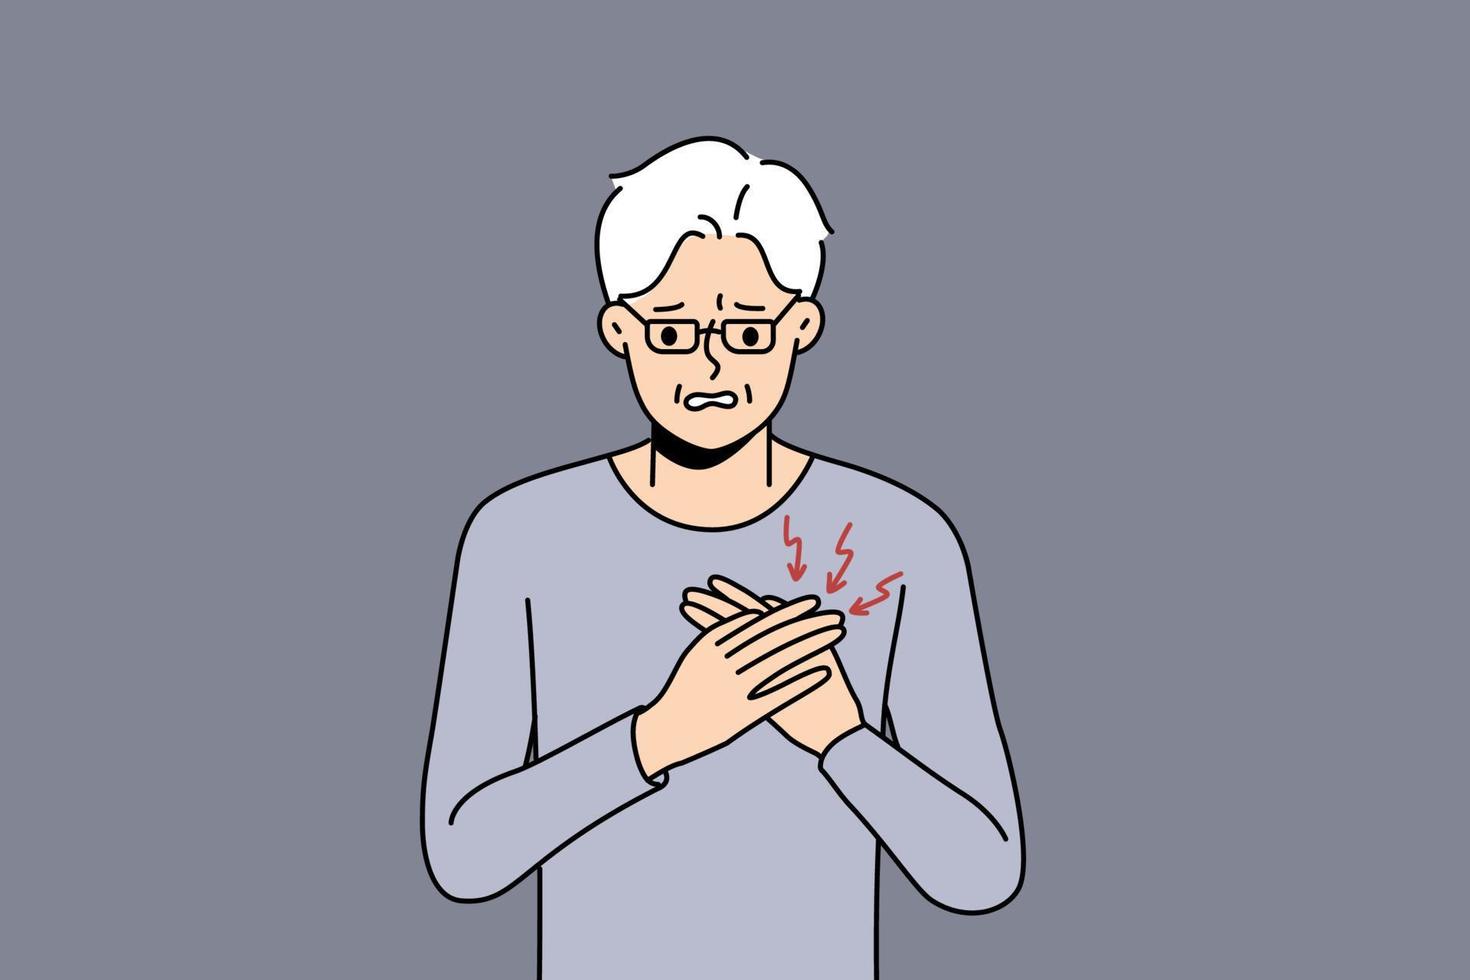 Unhealthy mature grandfather suffer from heart problems. Unwell sick old man touch chest struggle with cardiac arrest. Elderly healthcare. Vector illustration.